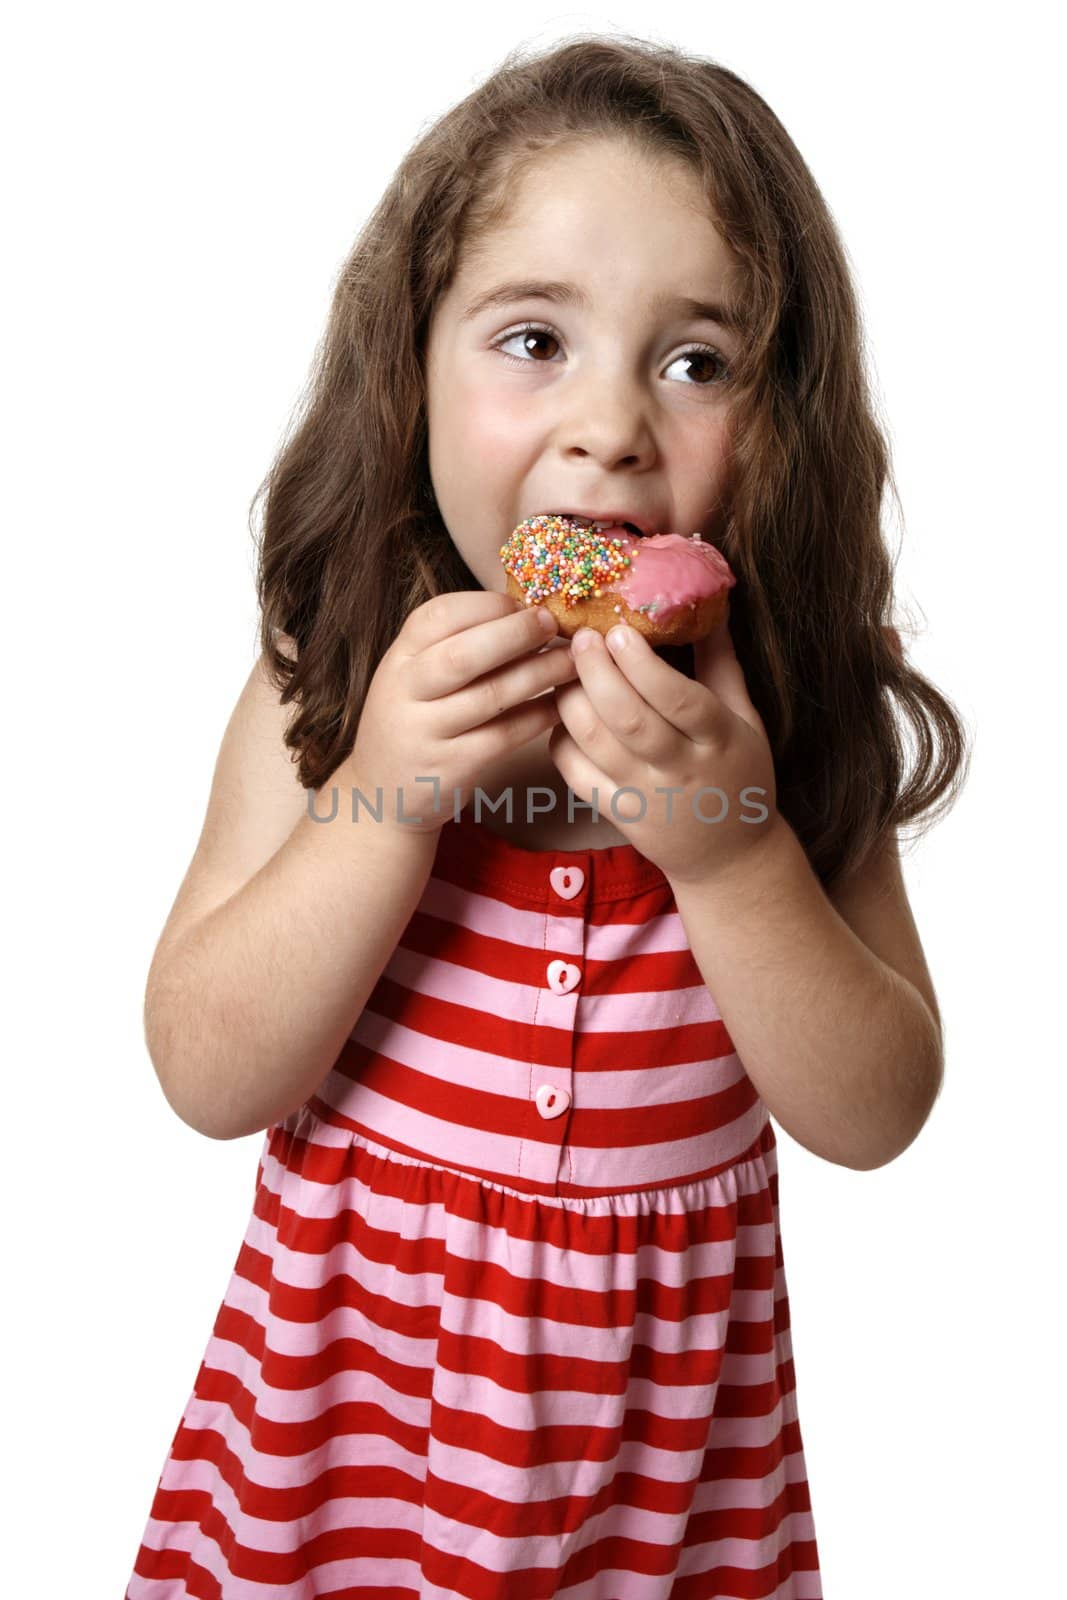 Young girl eating doughnut by lovleah